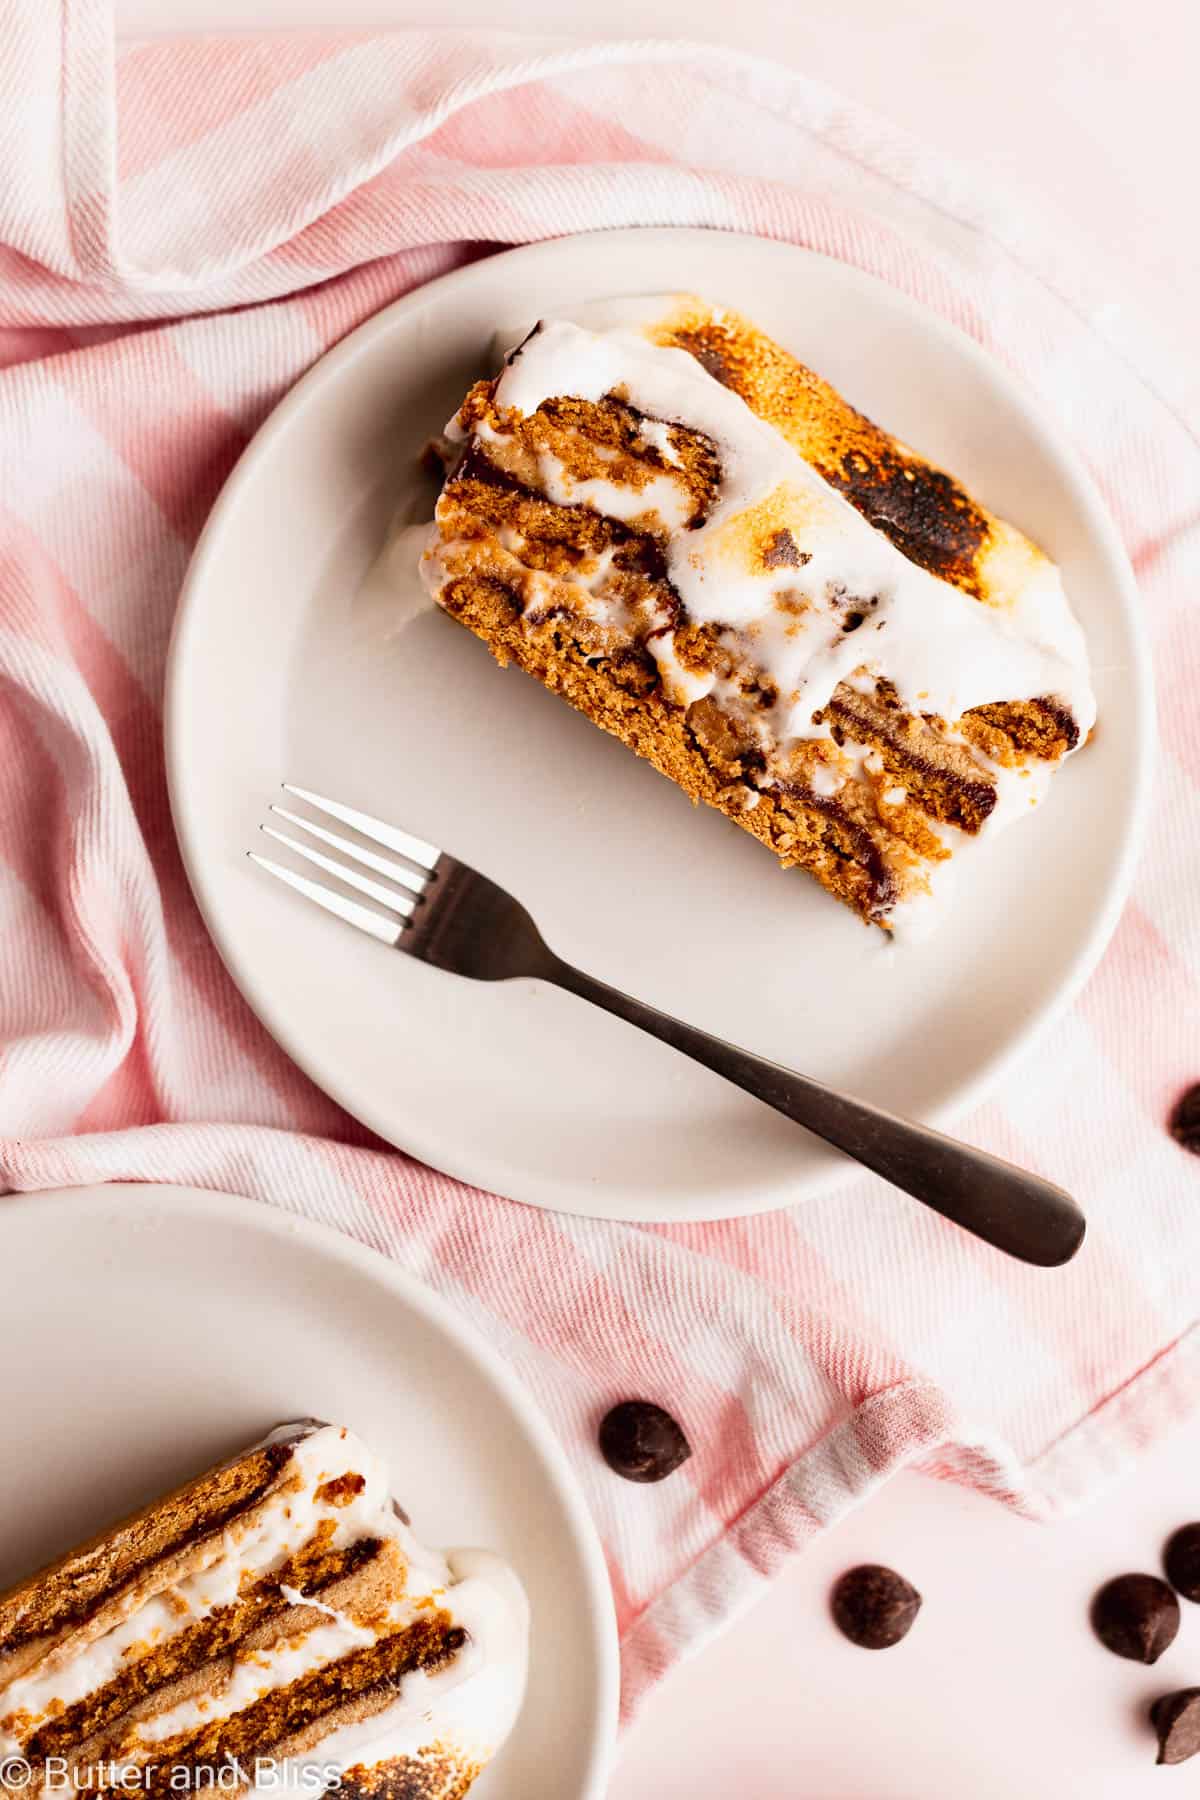 Drippy layers of toasted marshmallow on a slice of peanut butter s'mores cake.